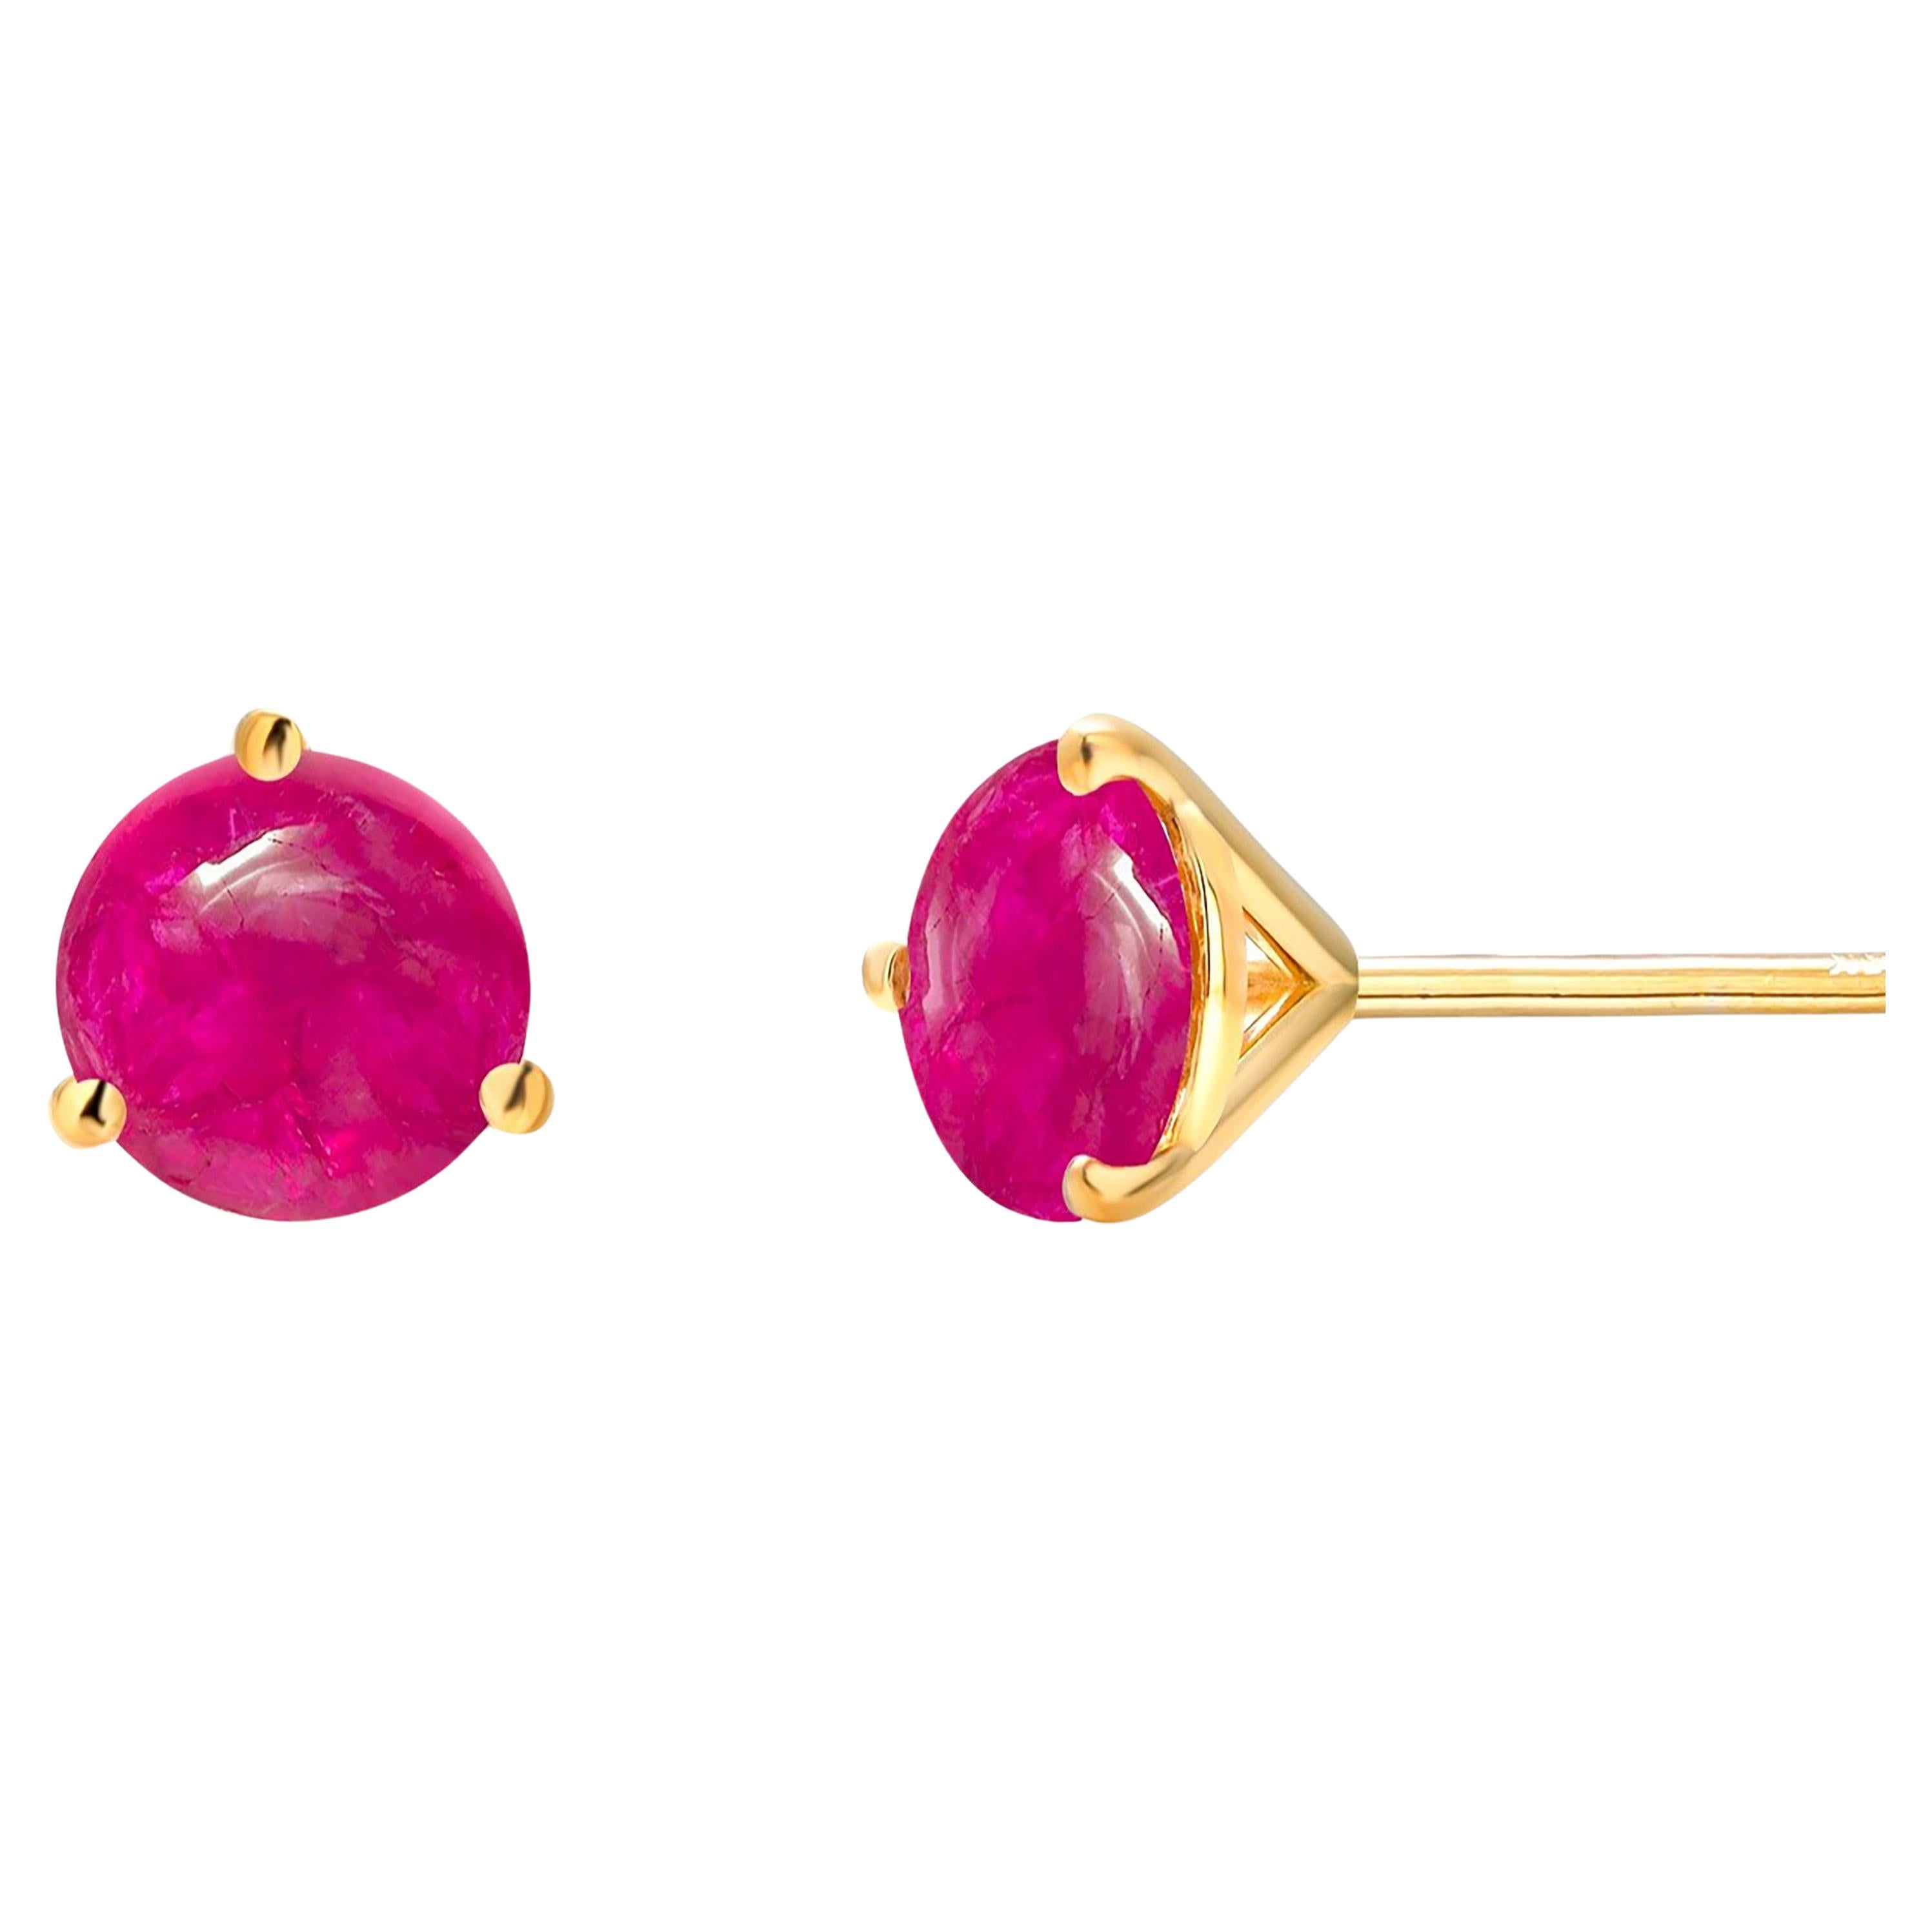 Two Matched Cabochon Rubies Weighing 1.50 Carat 0.23 Inch Yellow Gold Earrings